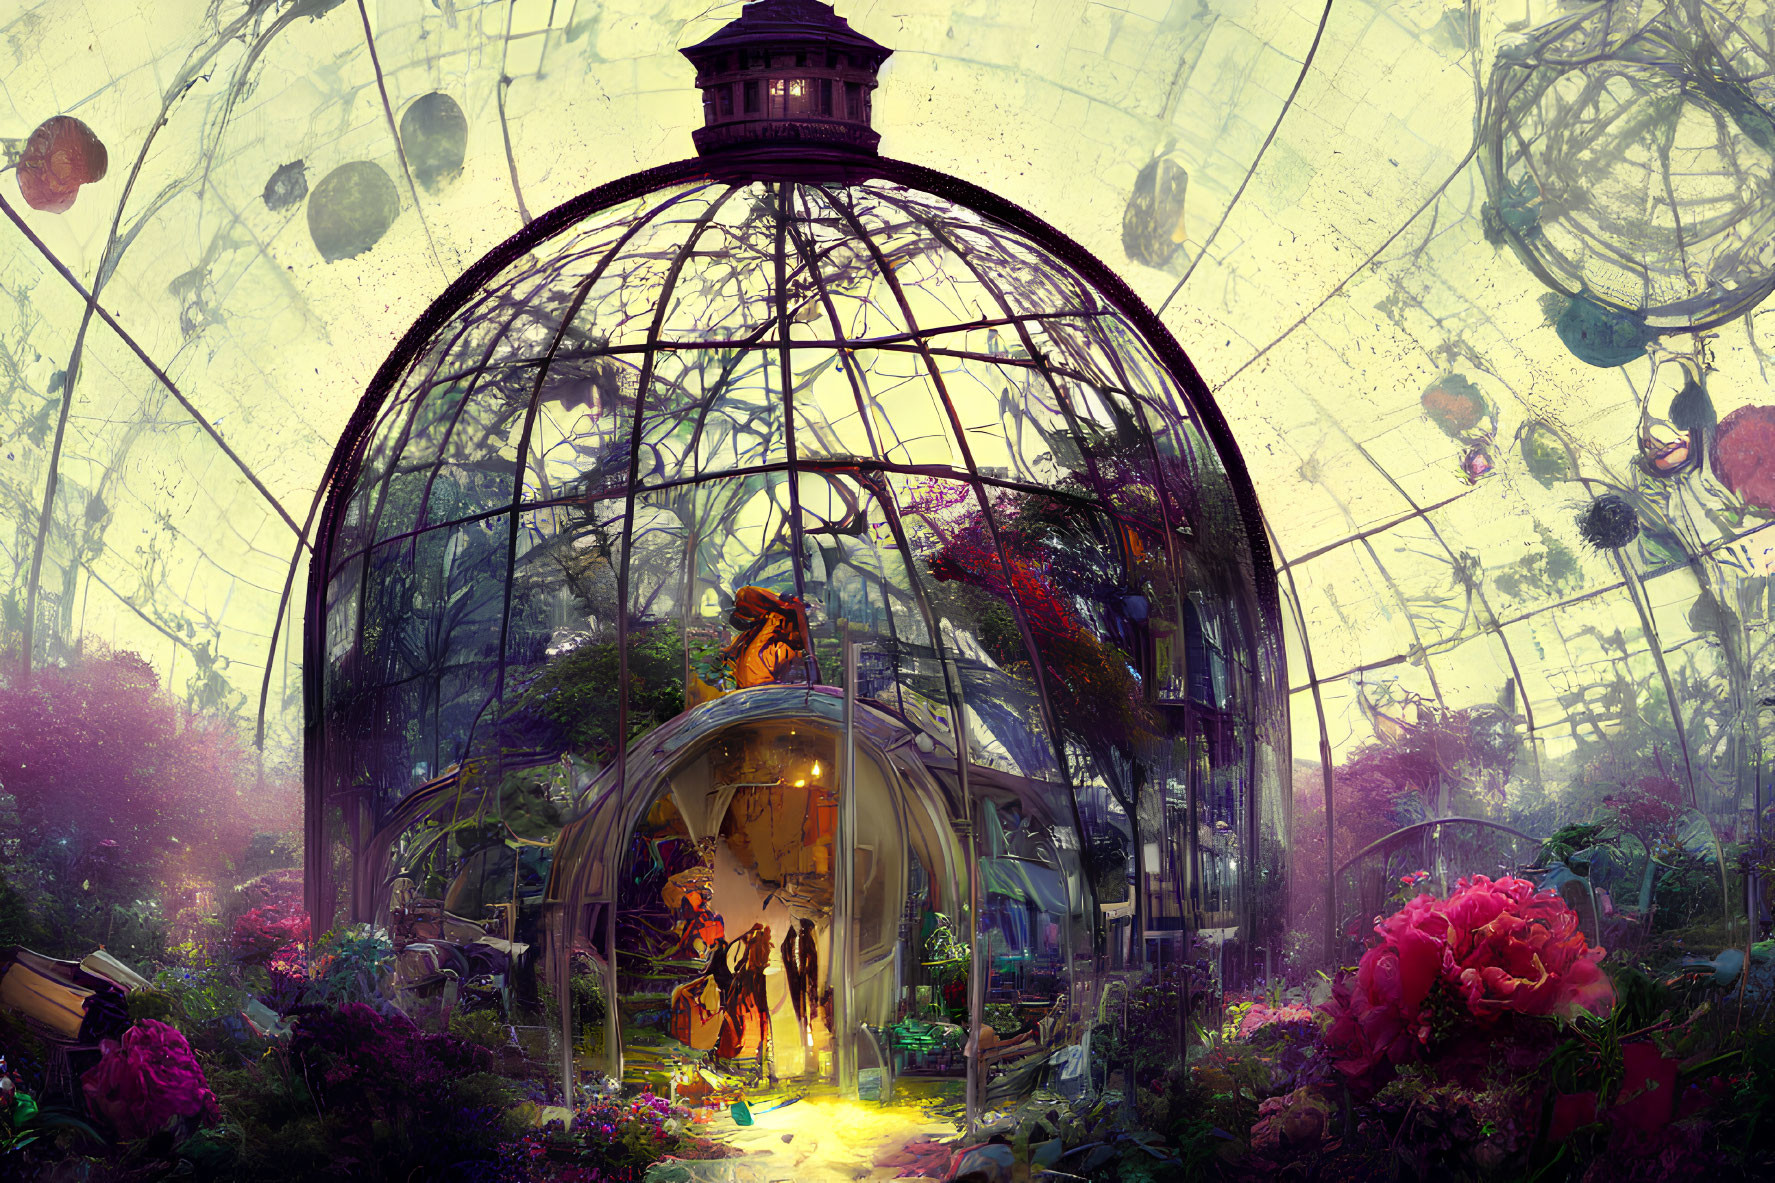 Majestic greenhouse with glass dome and vibrant plants